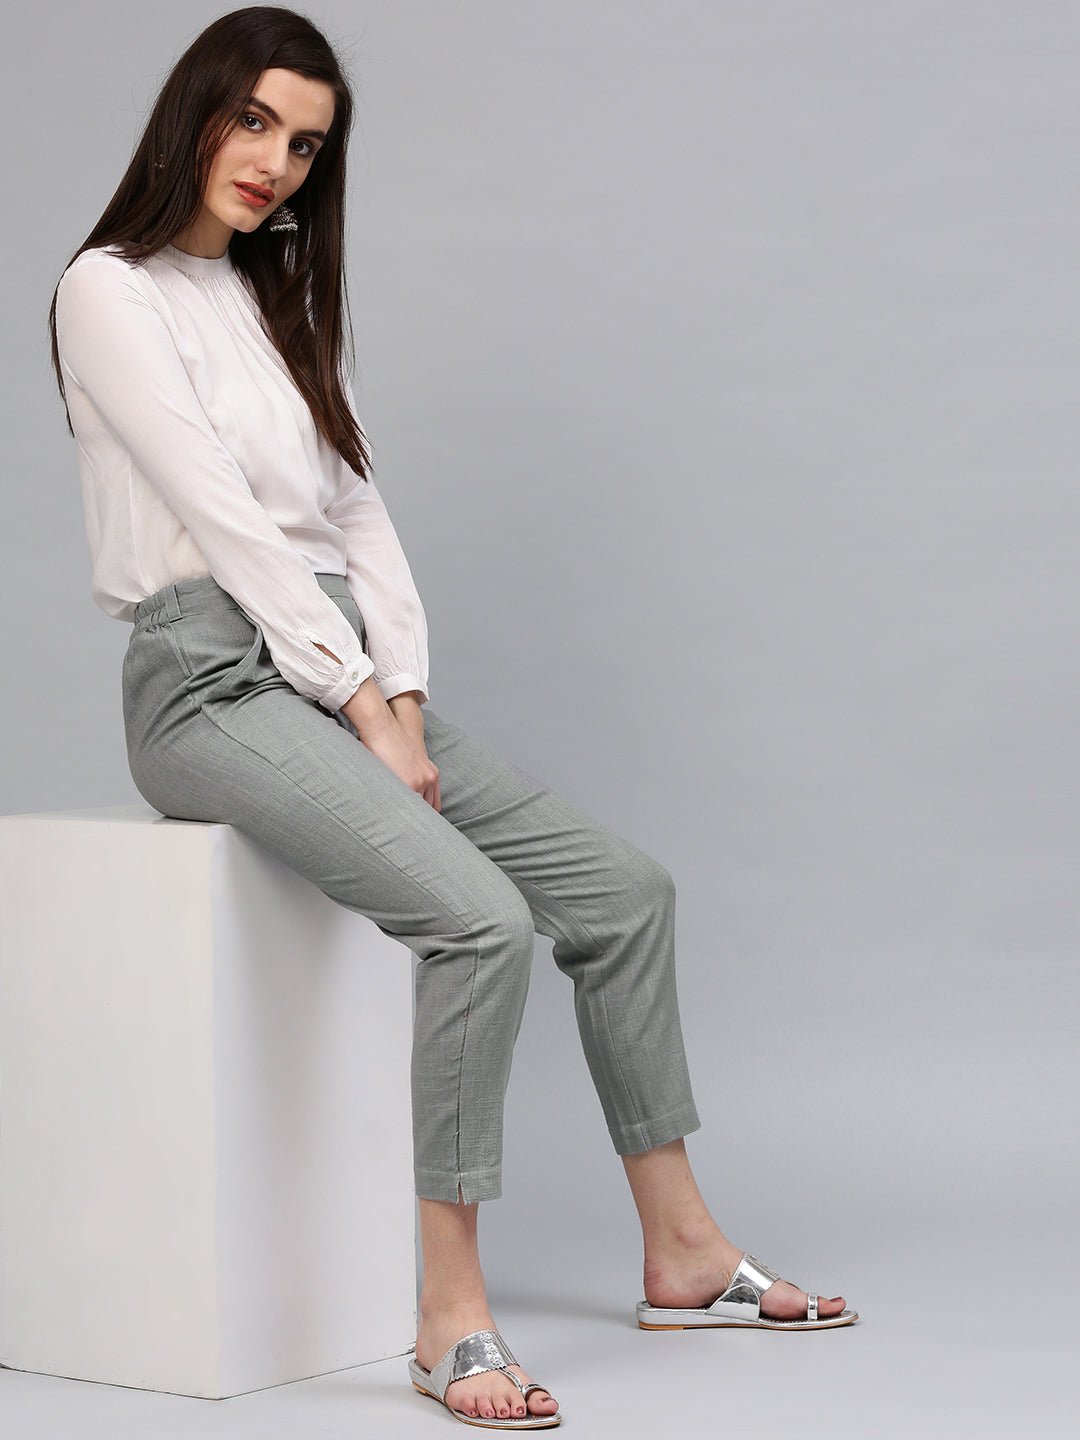 Get Ankle Length Pants for women